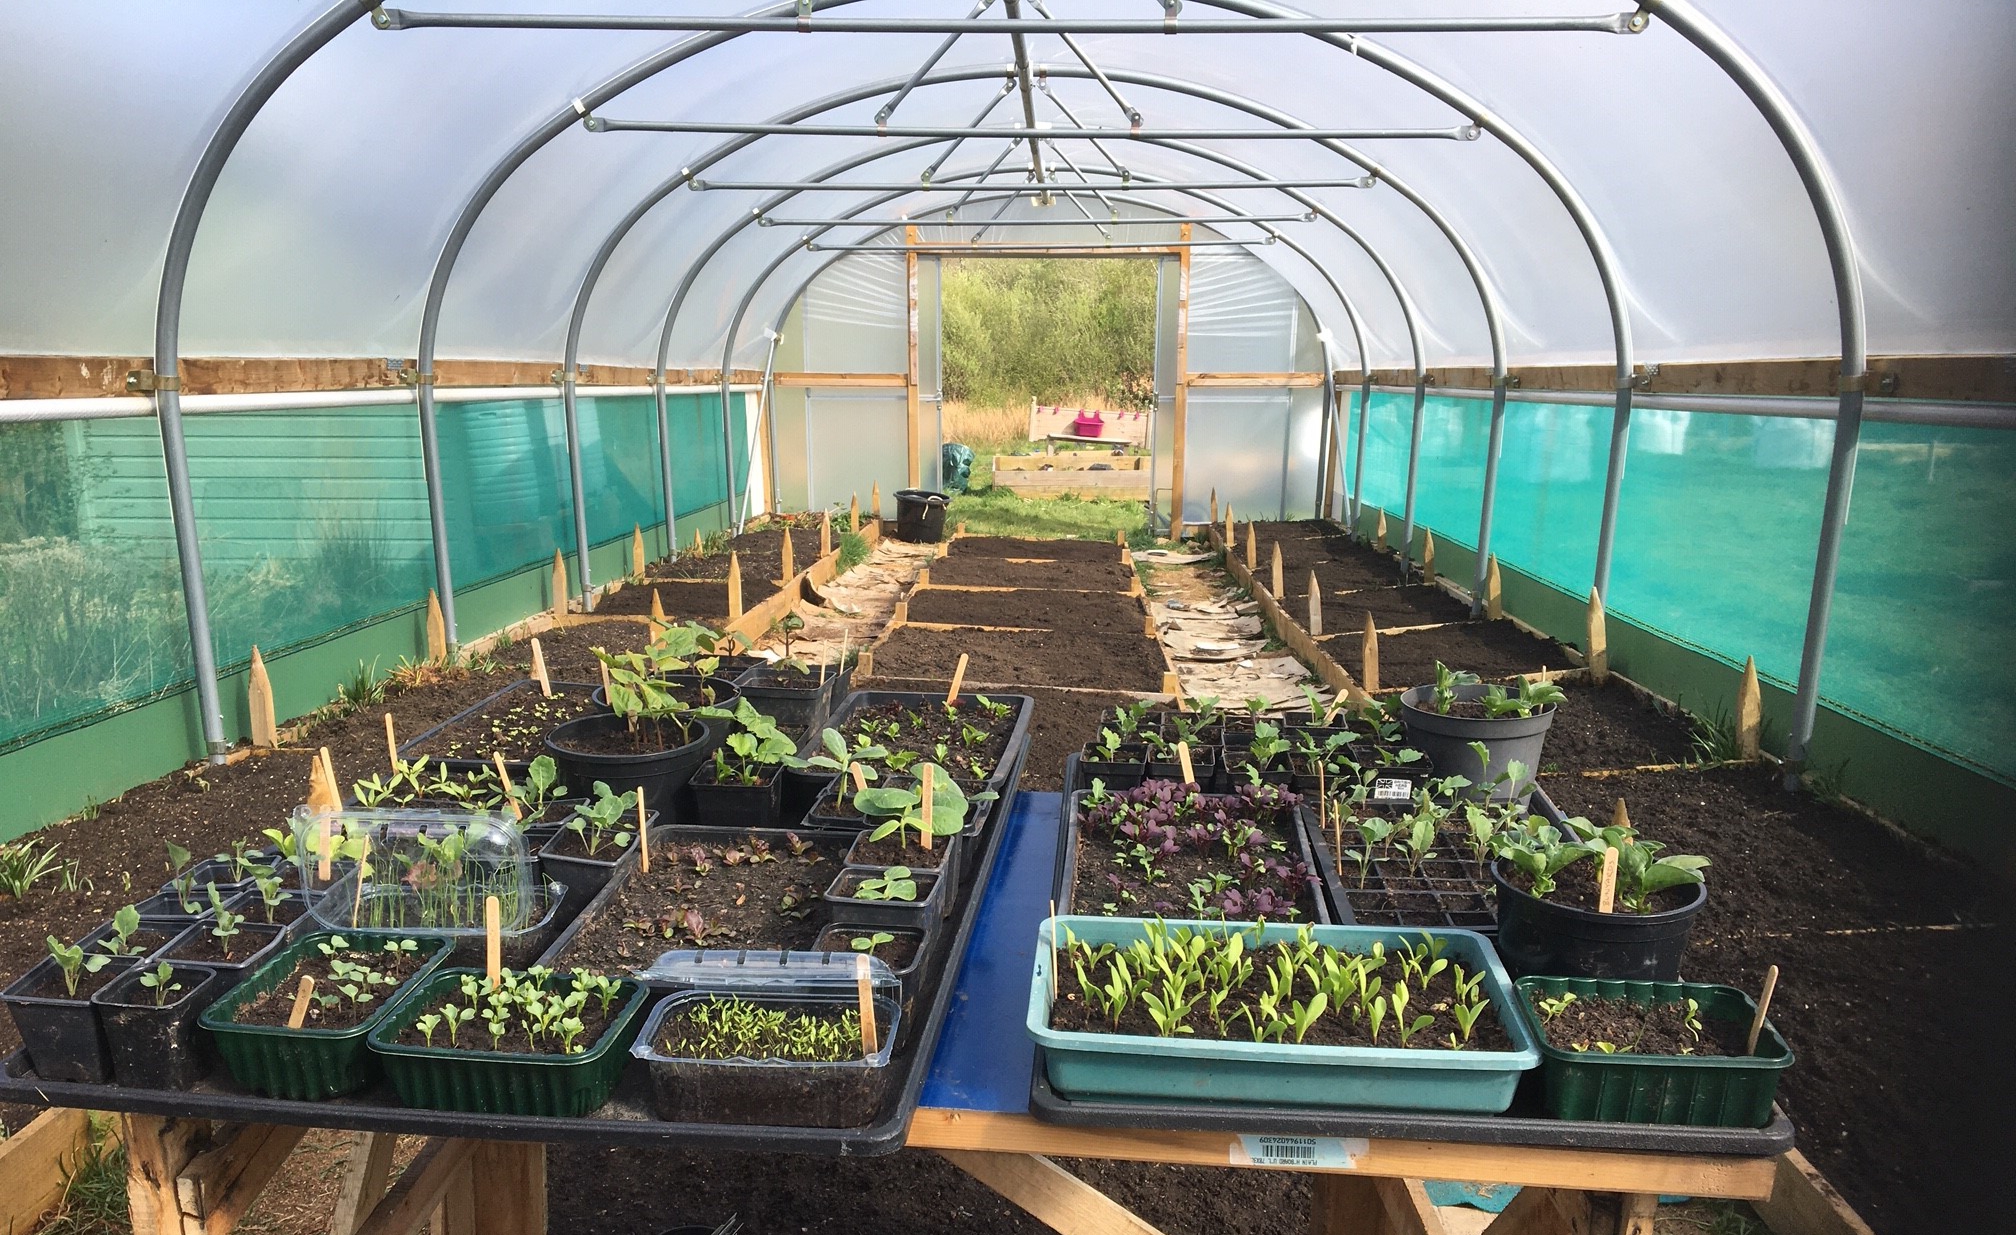 The Avant Gardeners received a grant of over £3,000 for the provision of topsoil for their polytunnel in the last round of funding.